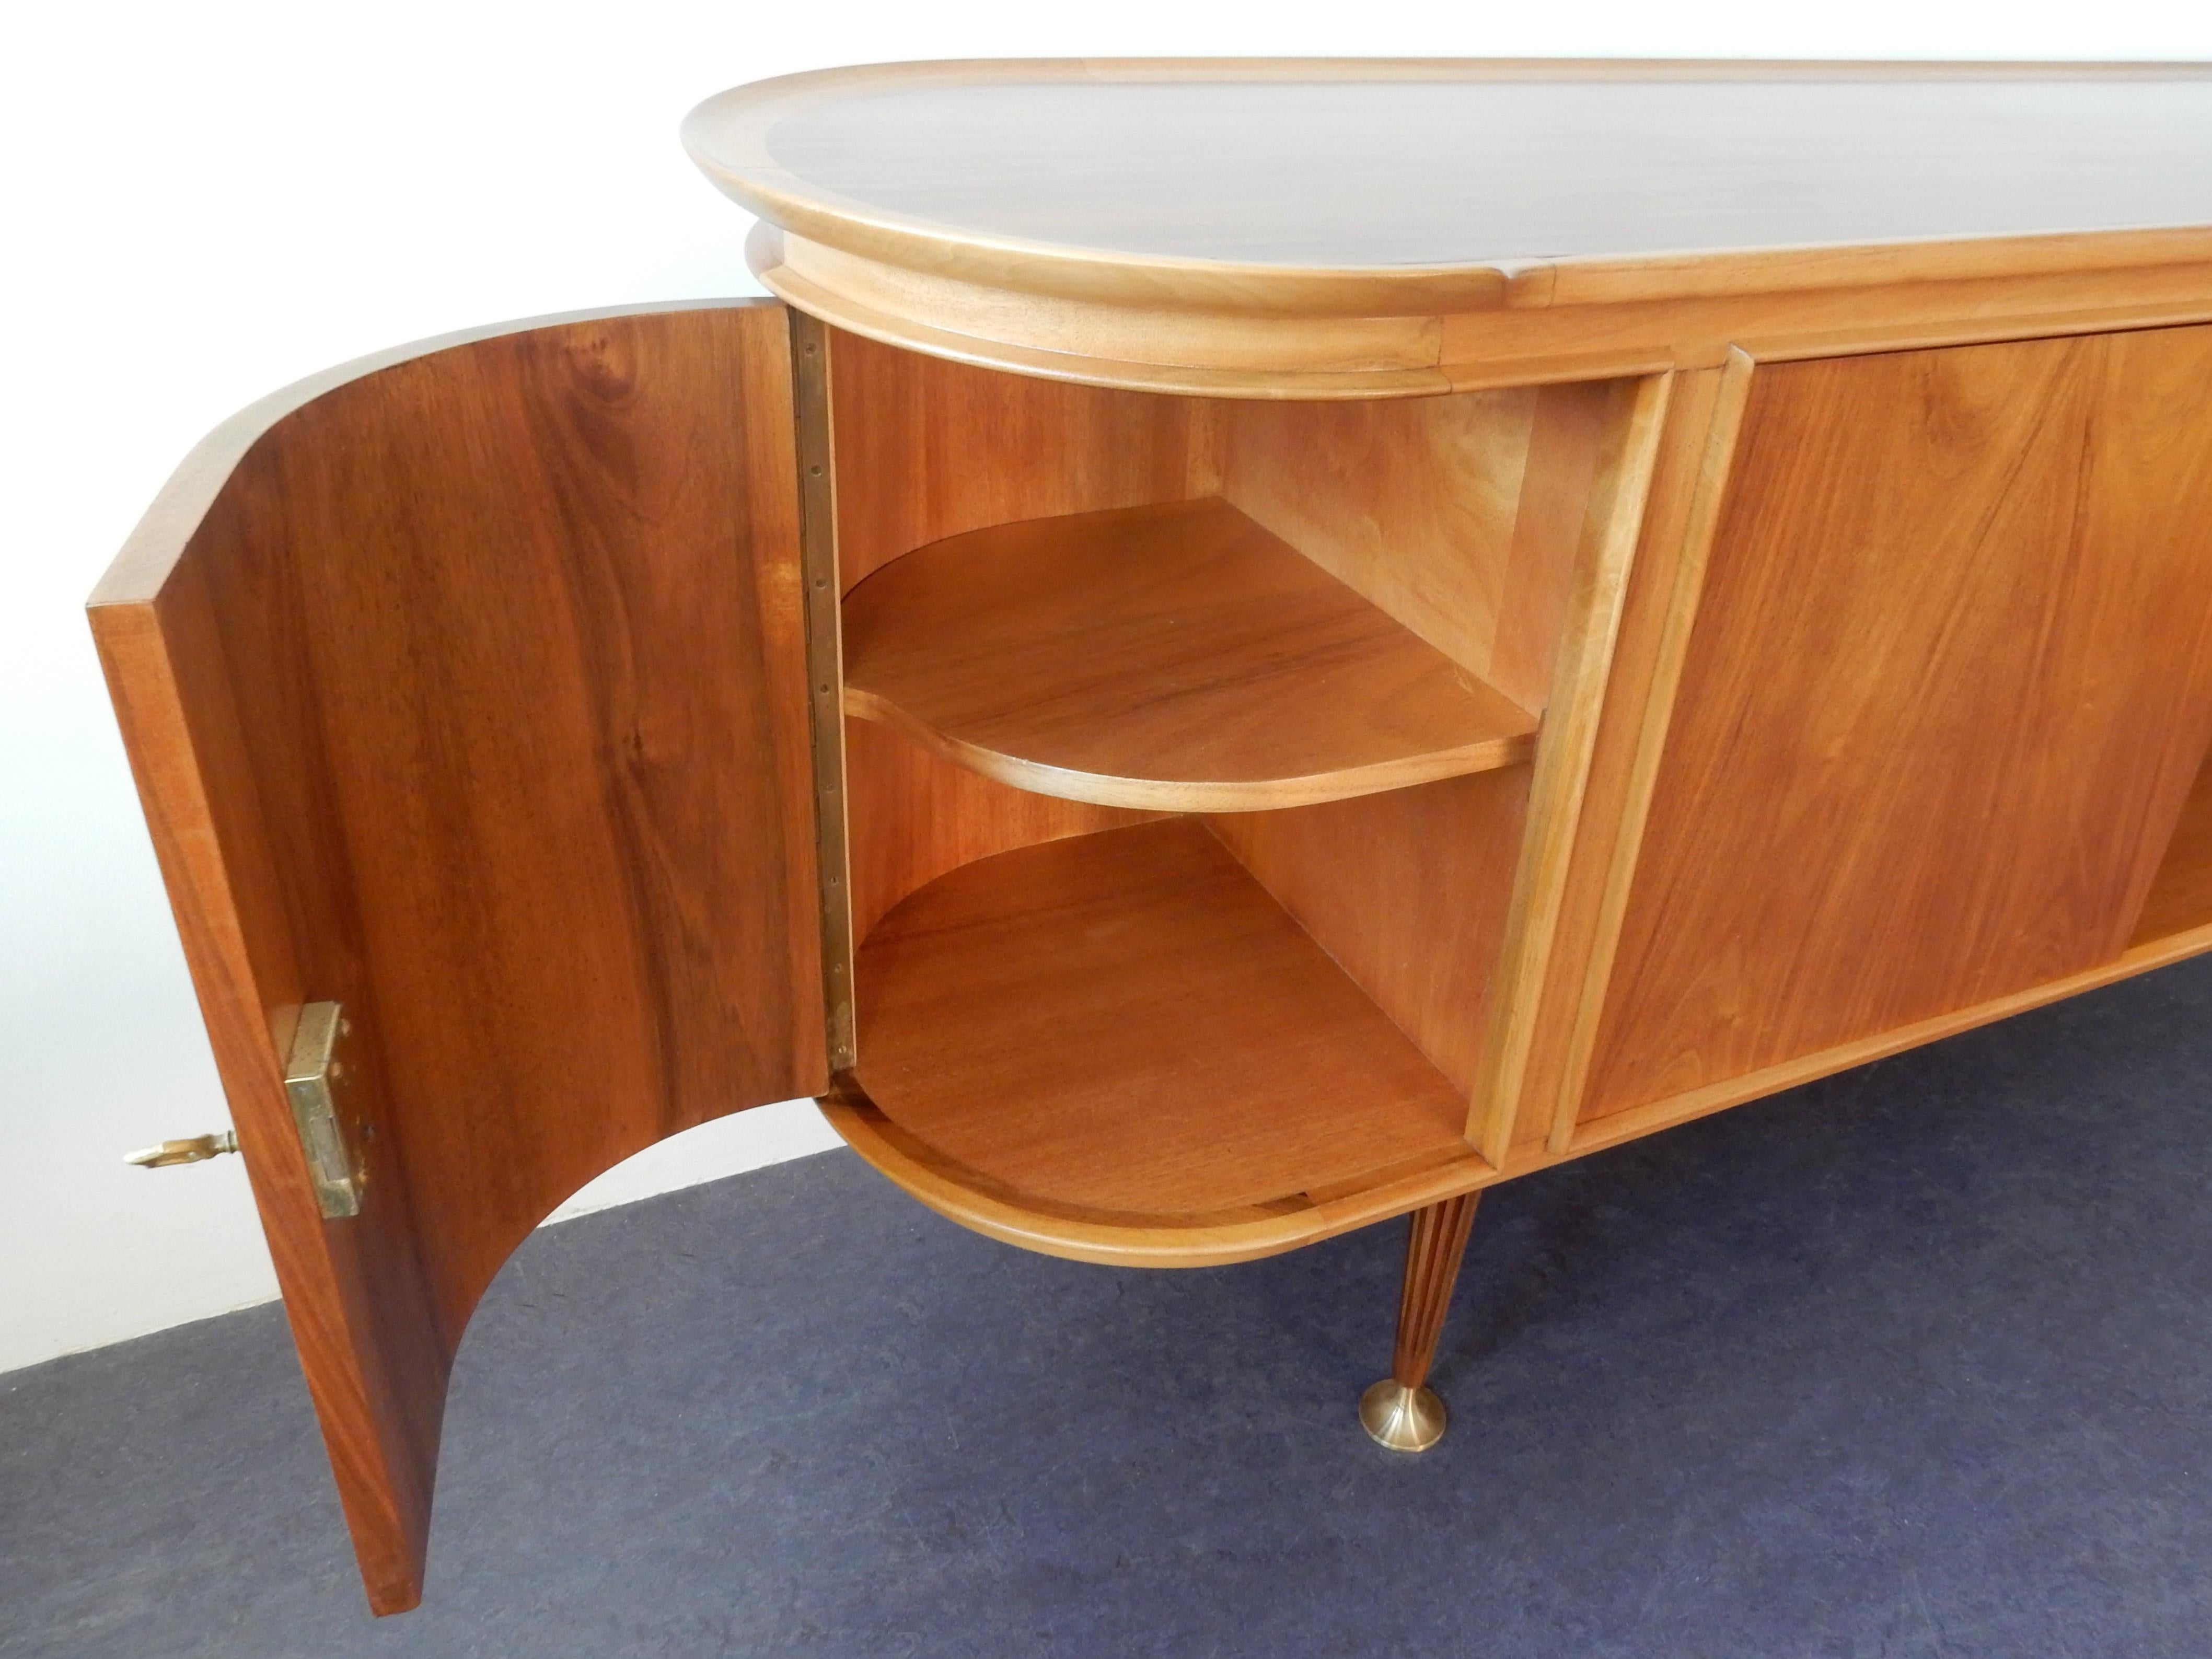 Mid-Century Modern 'Poly-Z' Sideboard by A.A. Patijn for Zijlstra Joure, the Netherlands, 1950s